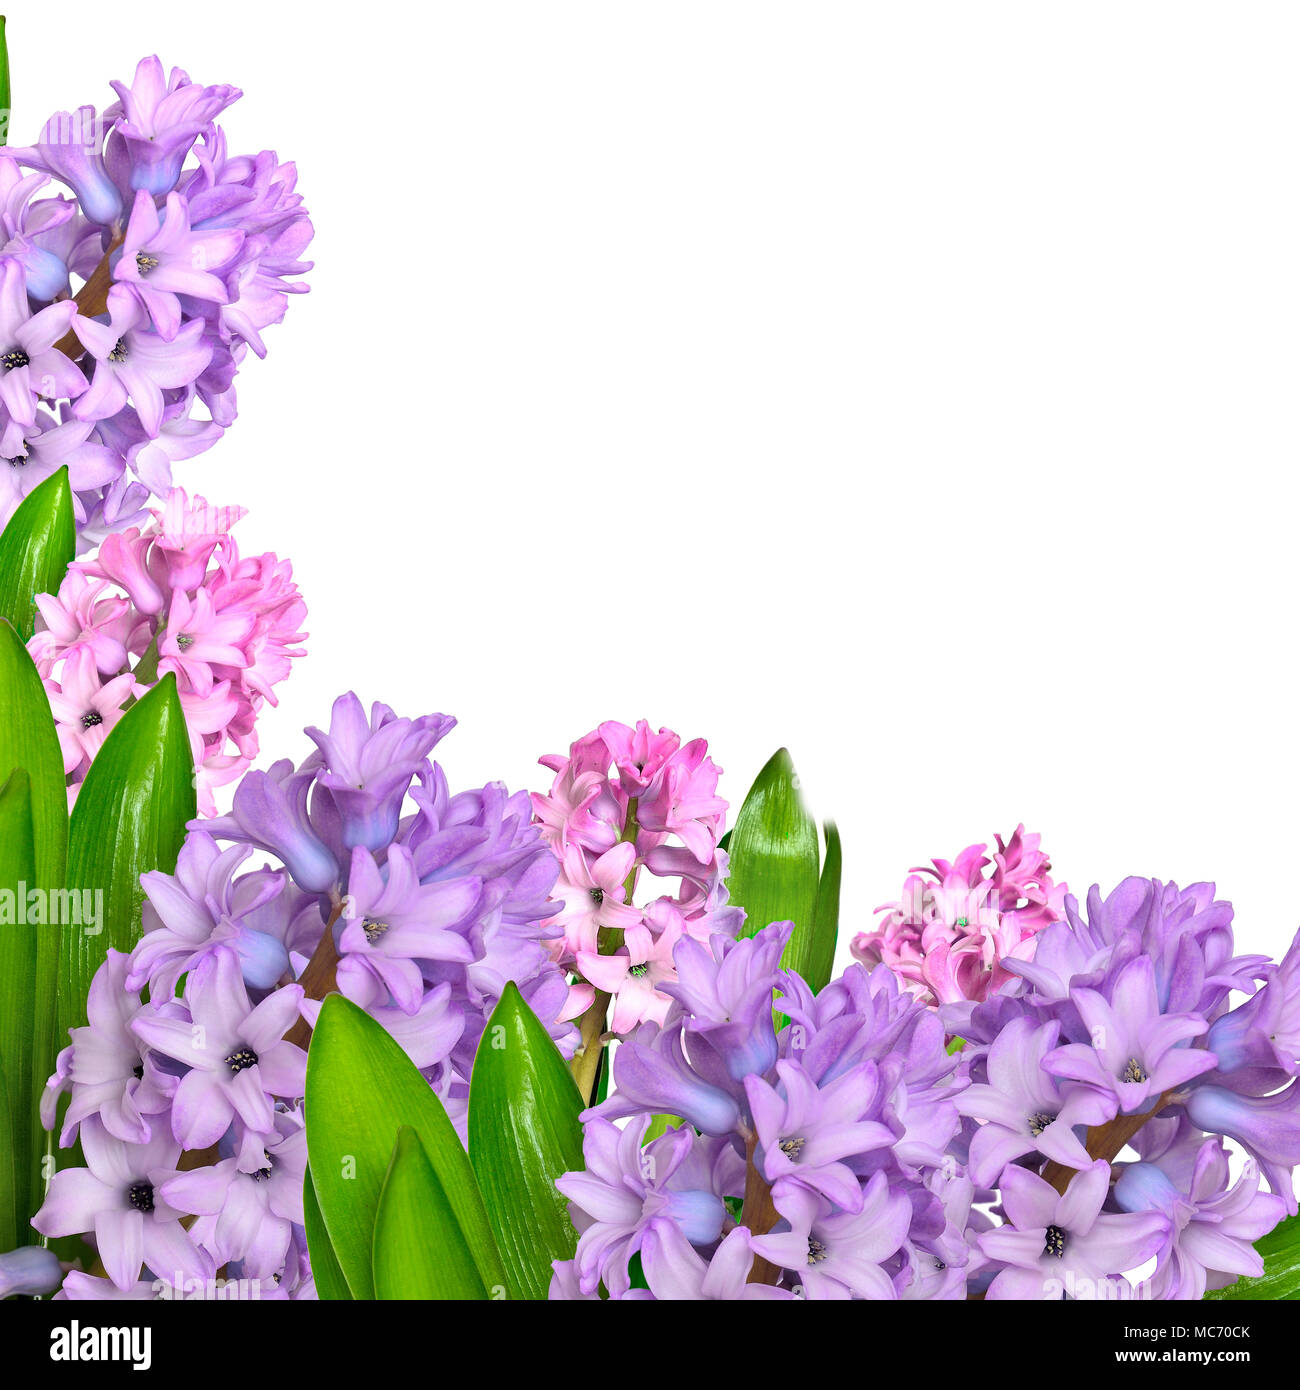 100+] Hyacinth Pictures | Wallpapers.com